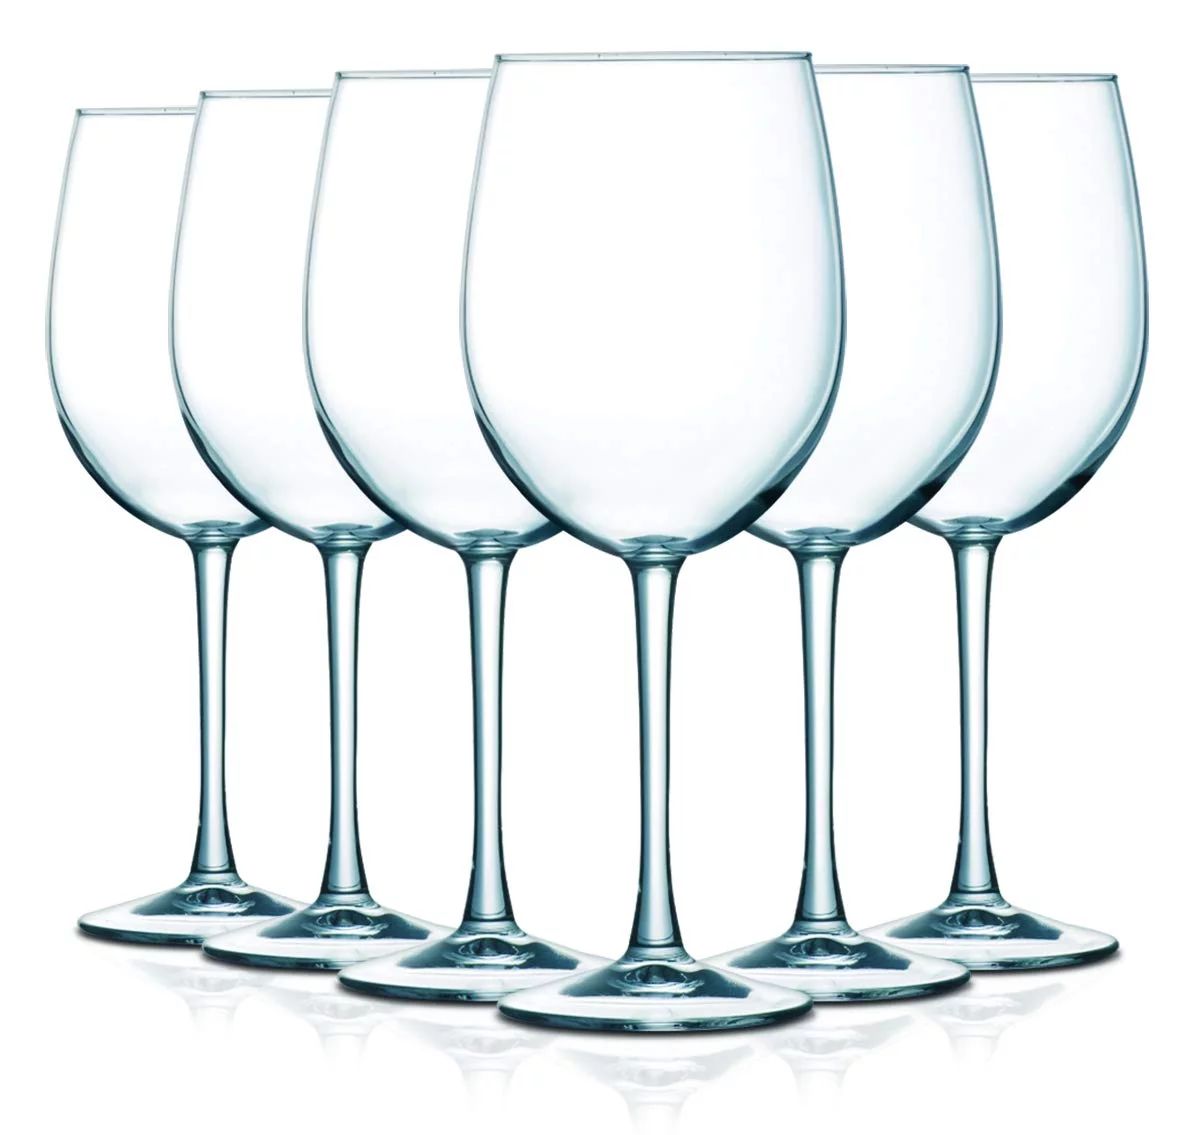 TableTop King 16 oz Wine Glasses, Stemmed Style, Cachet Accent, Clear, Set of 6 | Walmart (US)